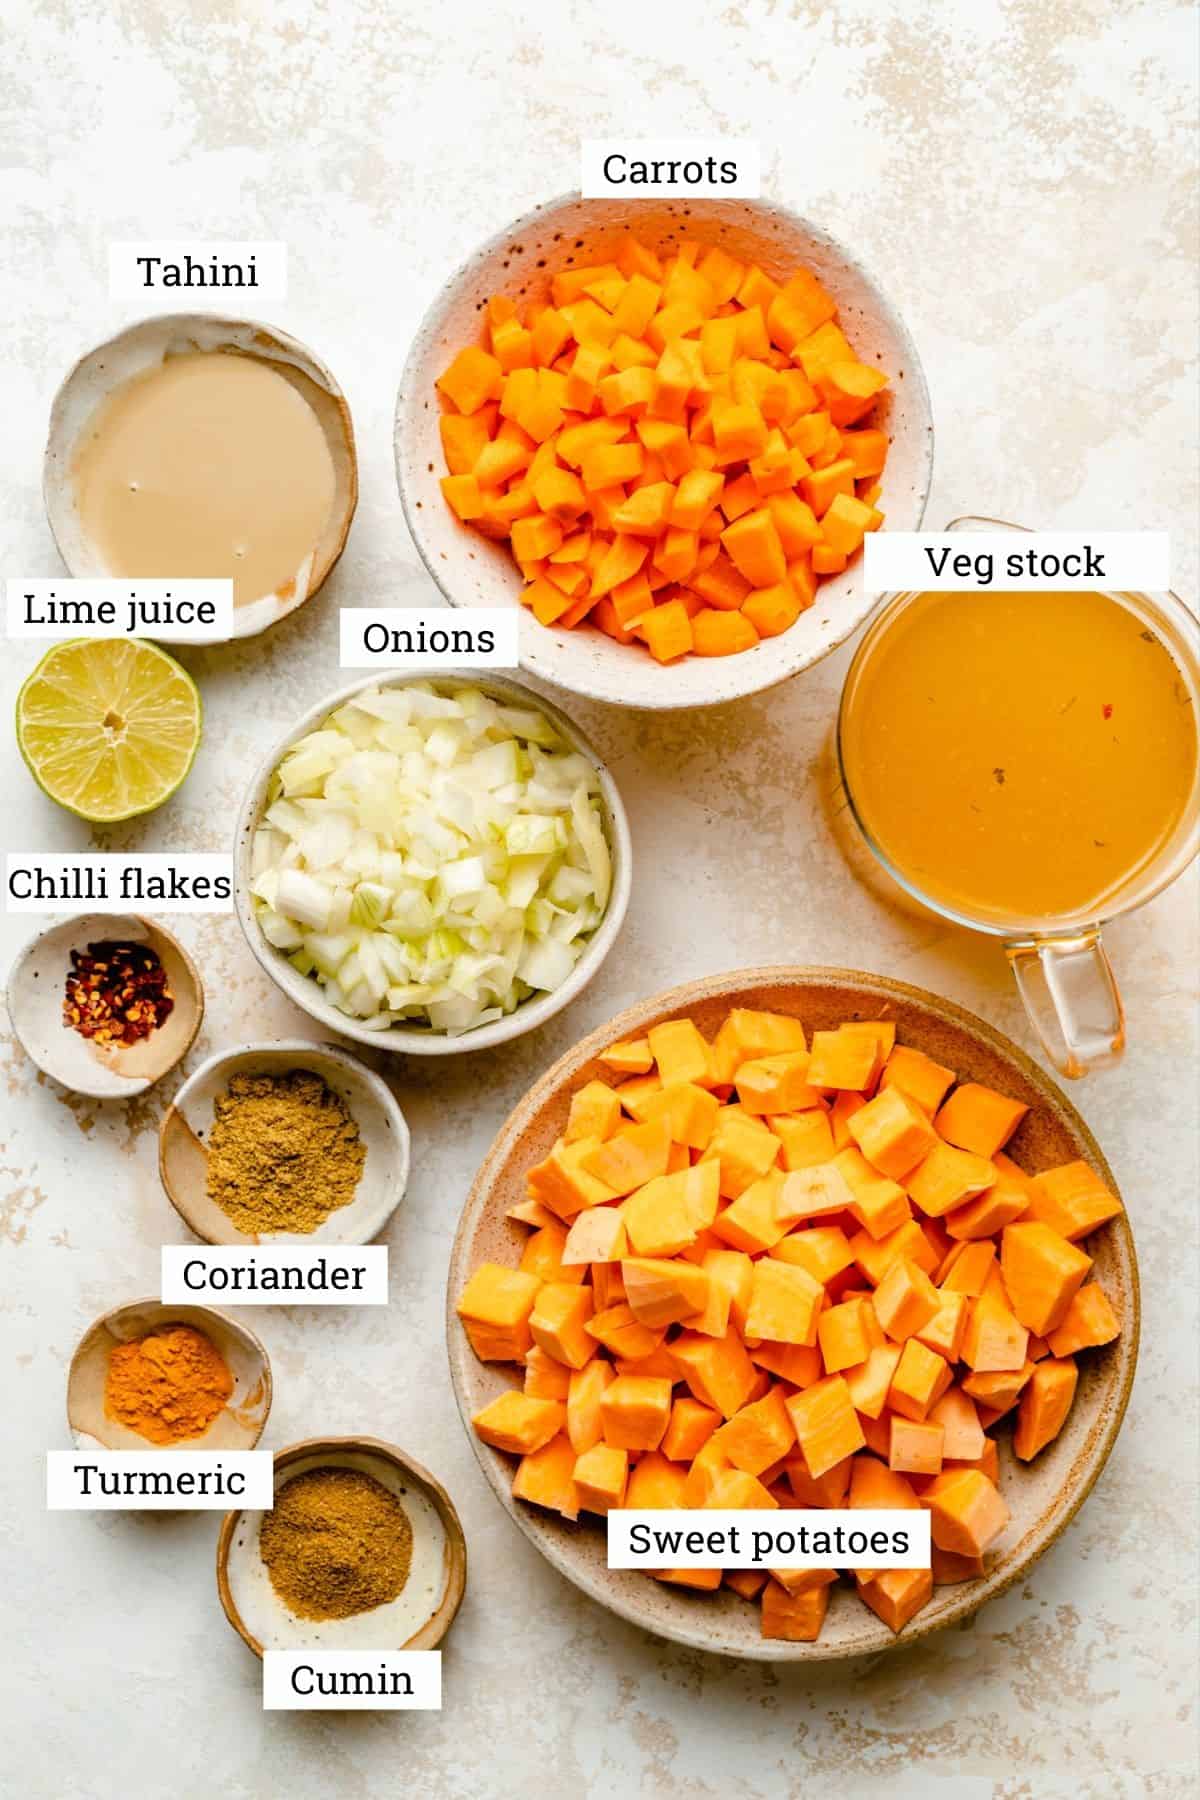 Ingredients for spiced sweet potato and carrot soup in various bowls including spices and vegetable stock.